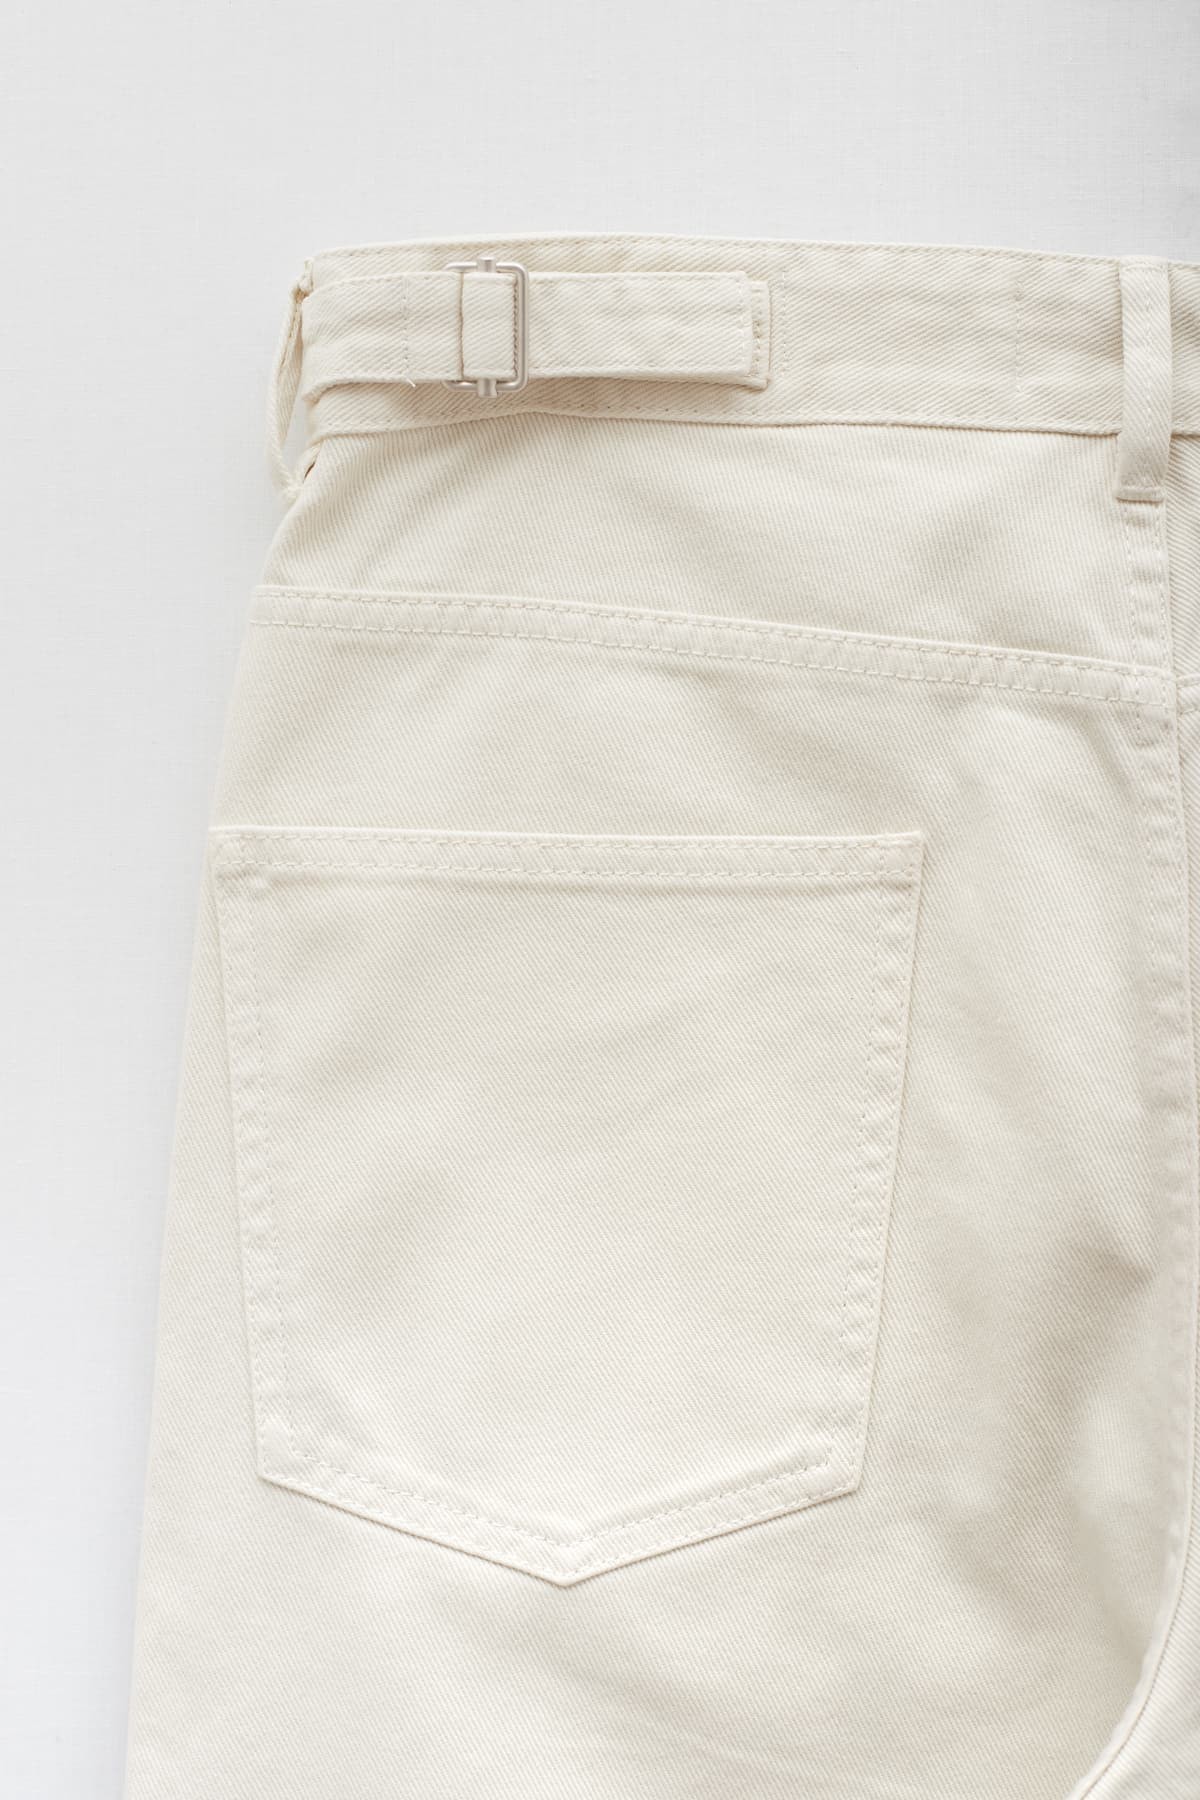 https://iamnue.com/5611-large_default/lemaire-clay-white-curved-5-pockets-pants.jpg